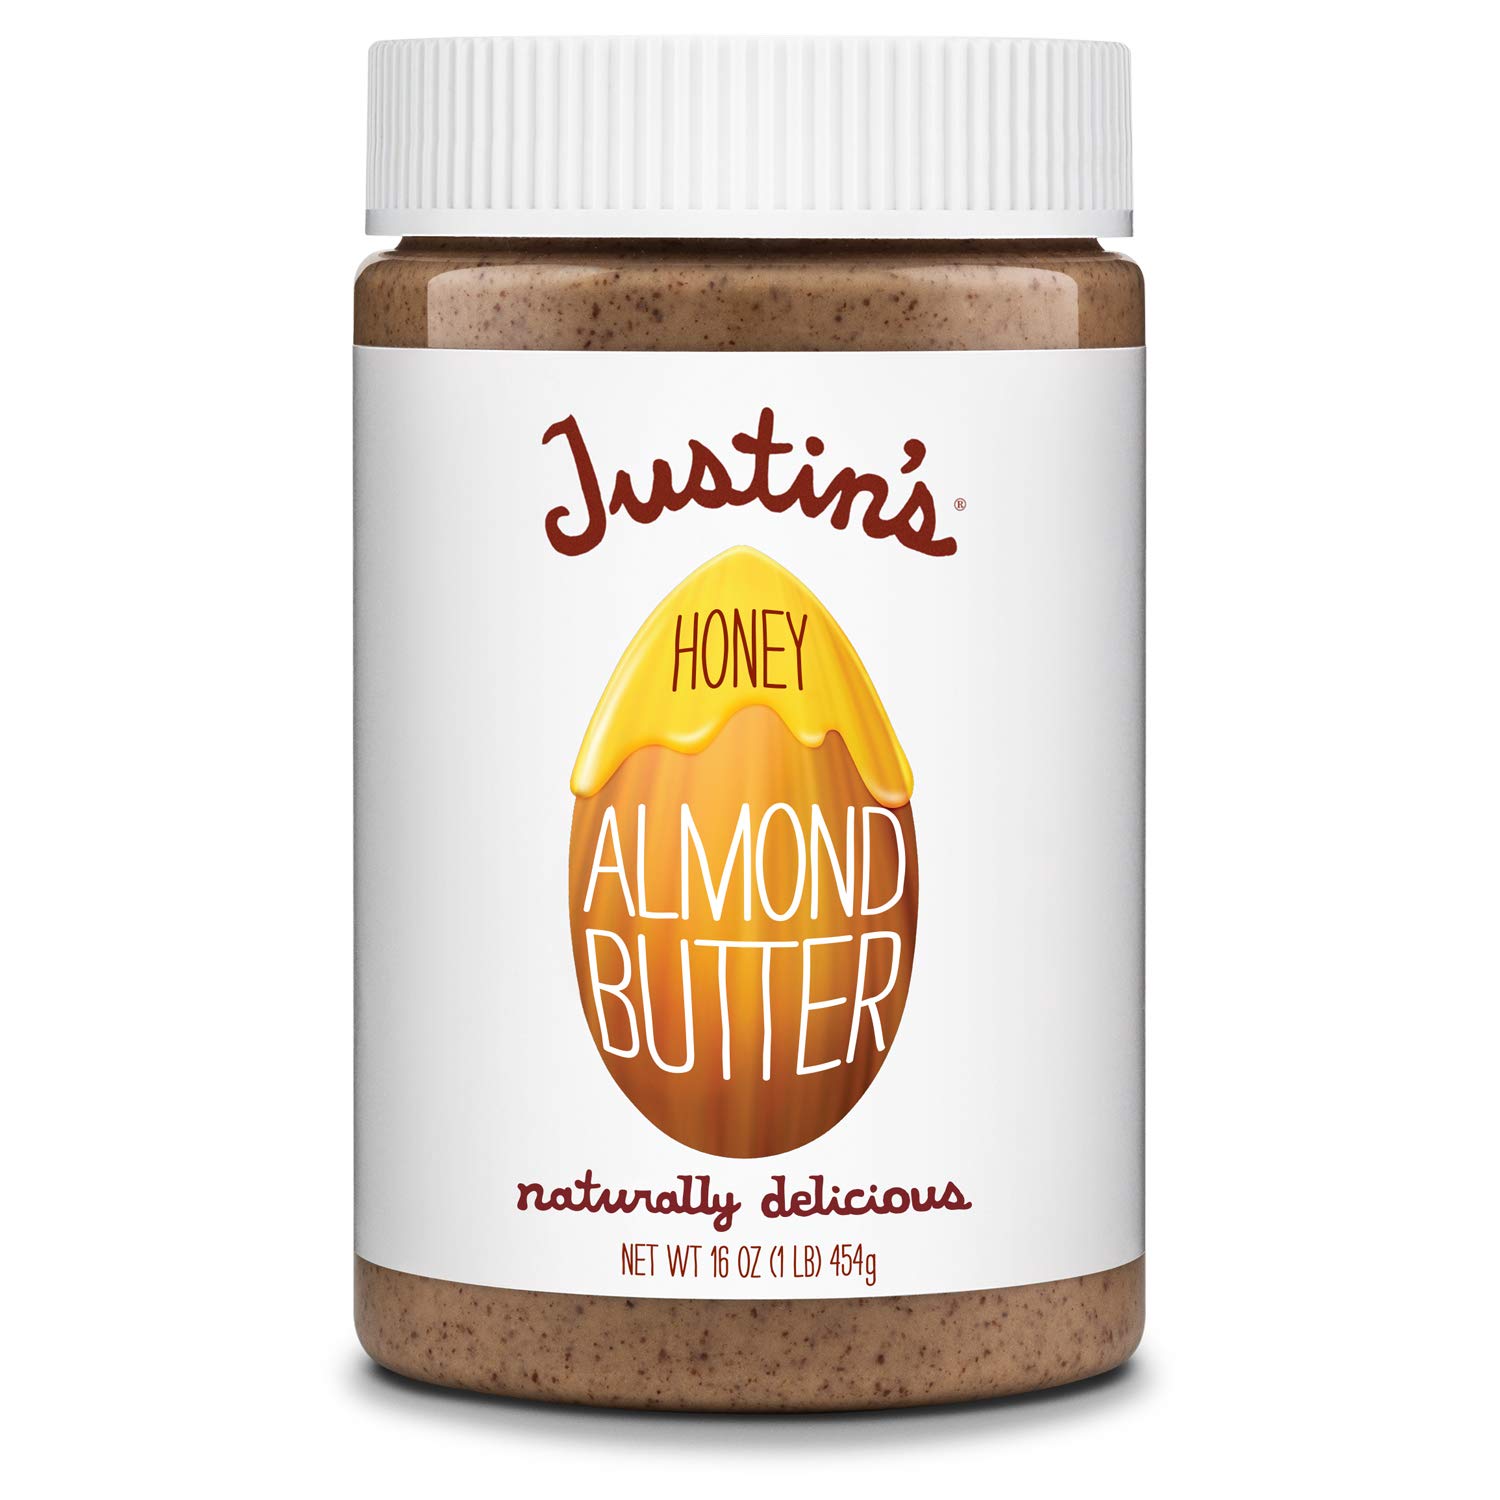 16-Oz Justin's No Stir Honey Almond Butter $5.55 w/ S&S + Free Shipping w/ Prime or on orders over $35